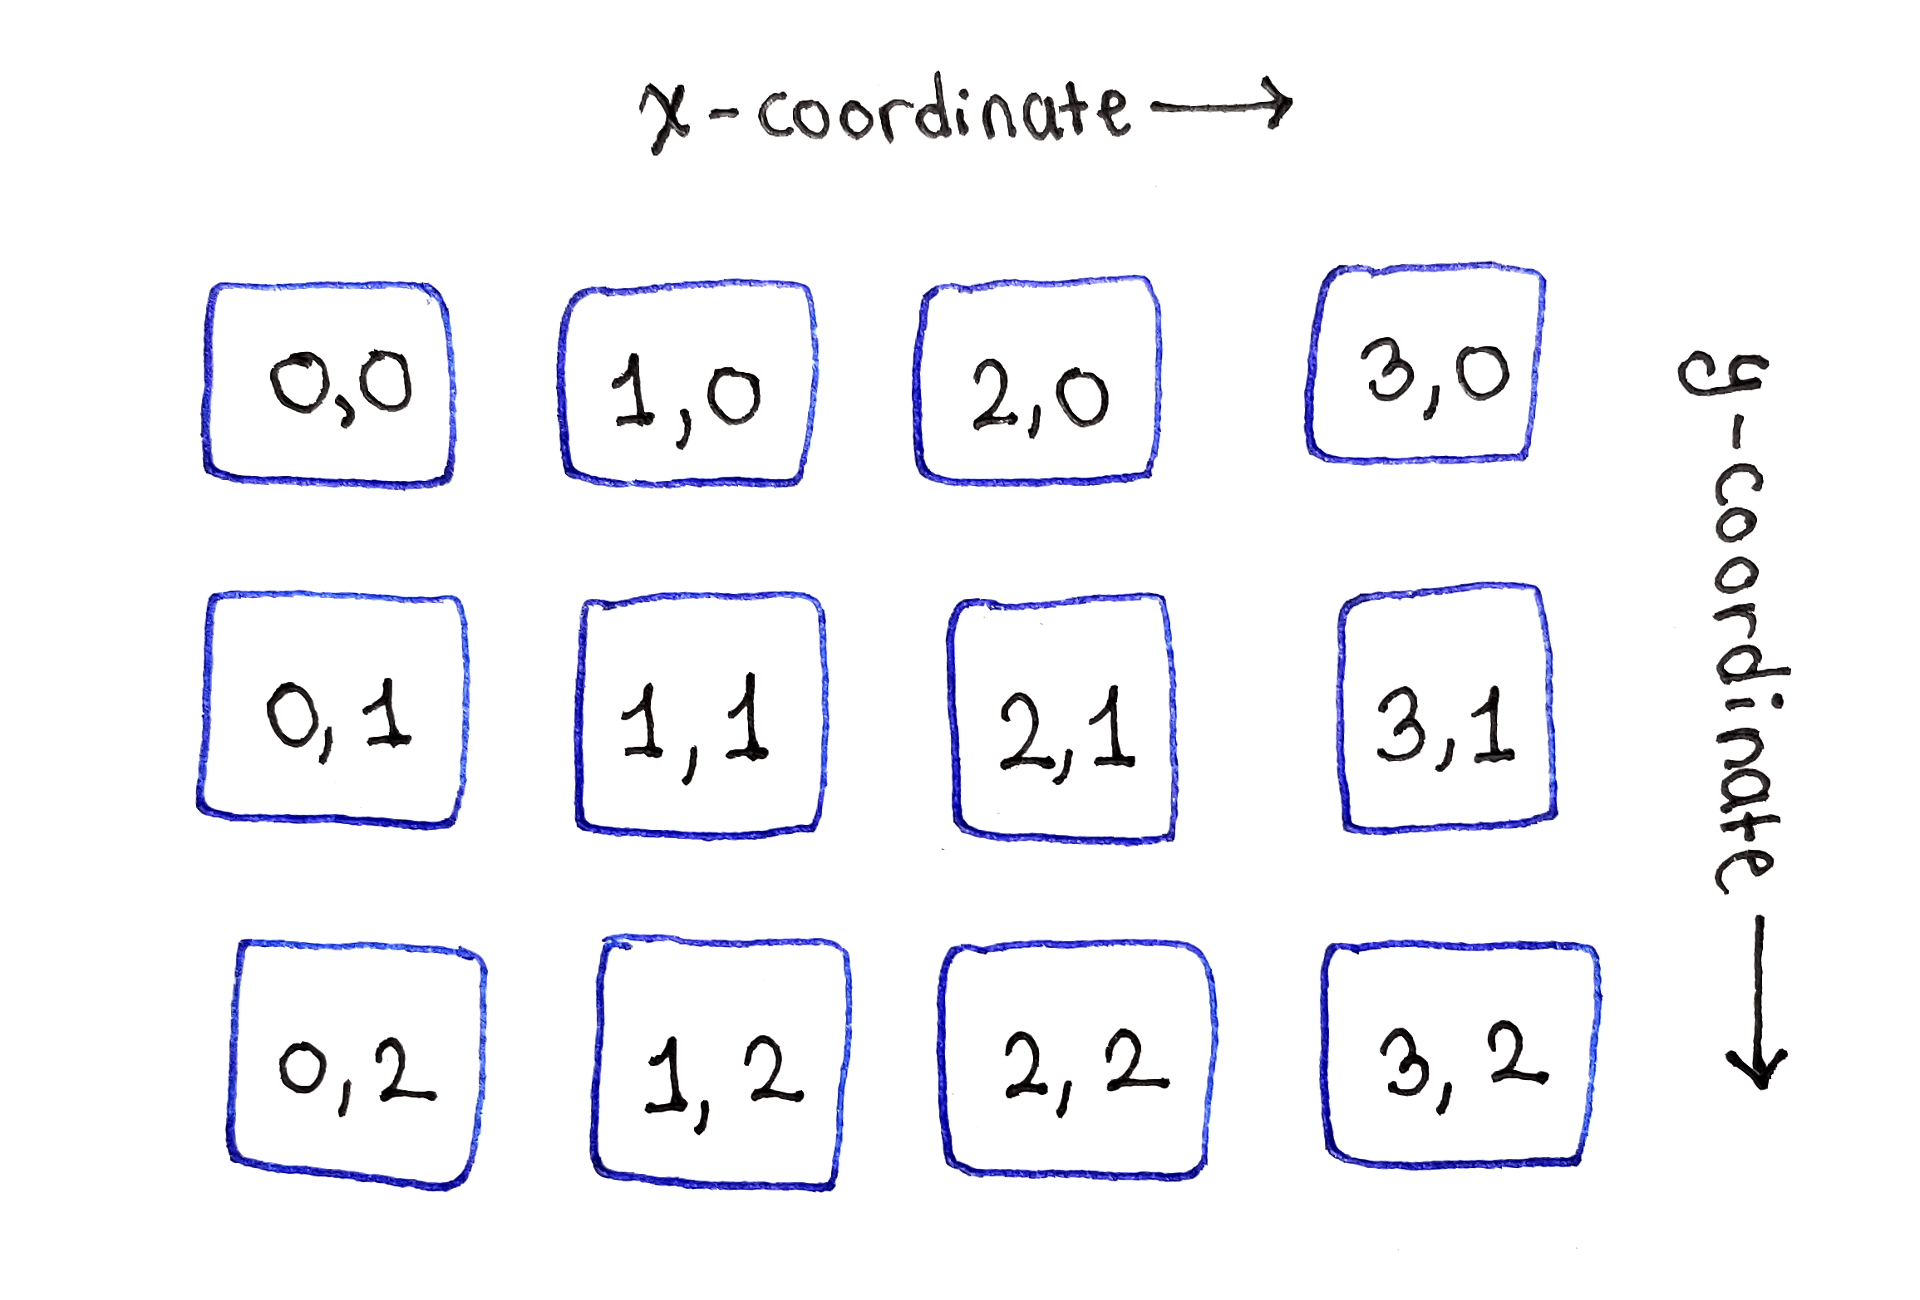 A two dimensional grid with width four and height three. Each cell corresponds to two numbers x and y, with x increasing from left to right, and y increasing from top to bottom.